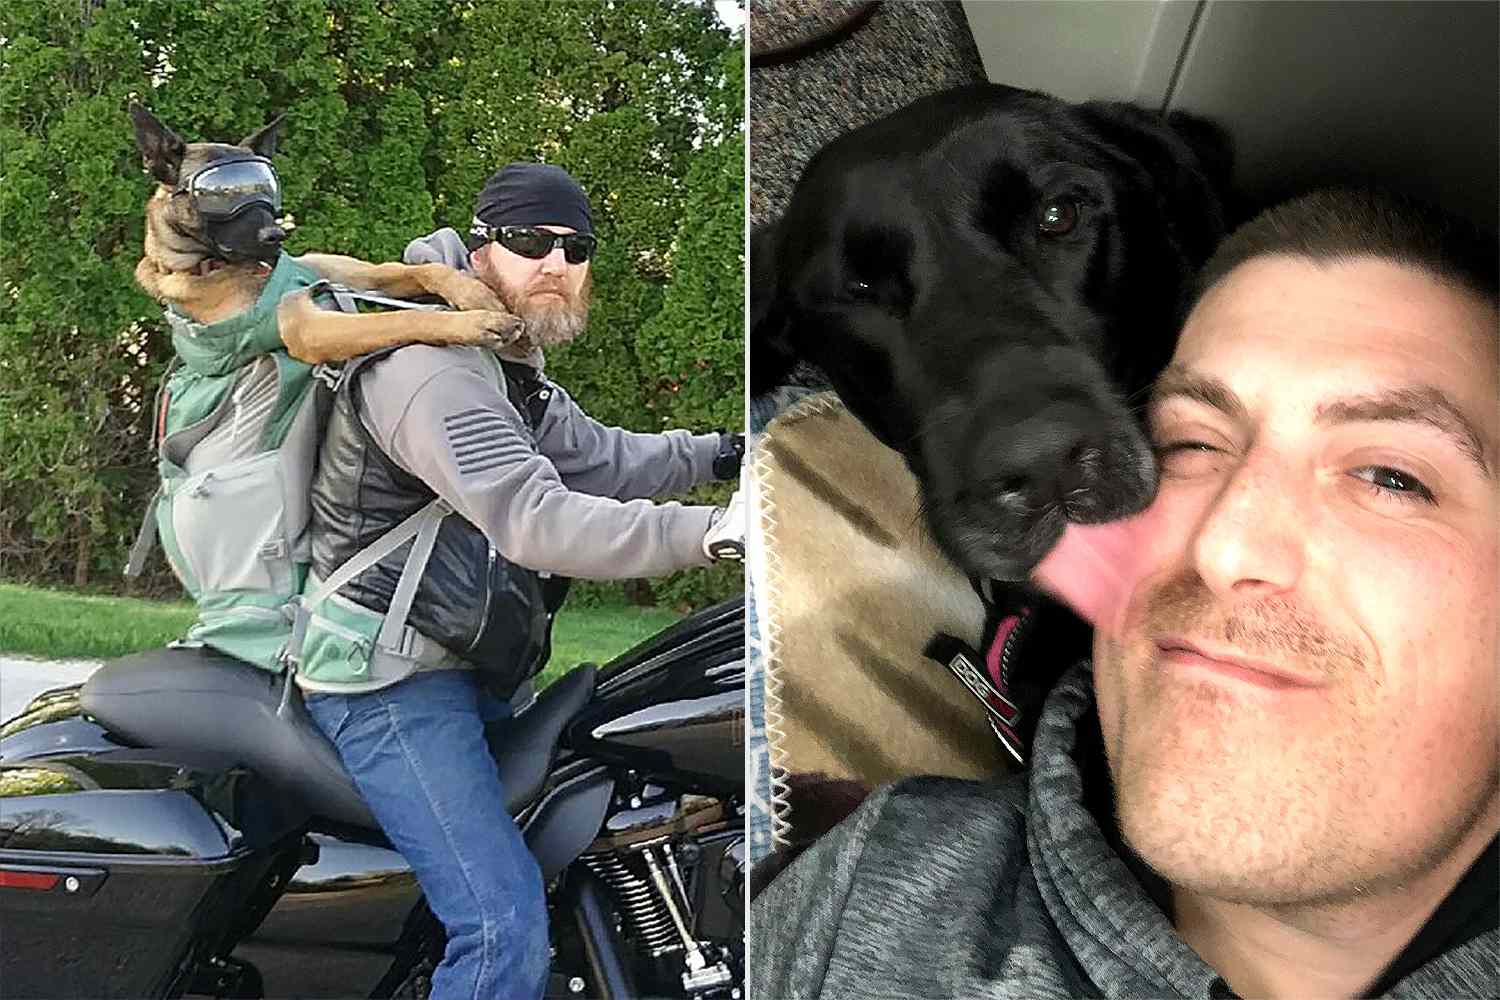   
																Service Dog Program Dedicated to Helping Veterans with PTSD Gives Hope: 'He Saved My Life Many Times Over' 
															 